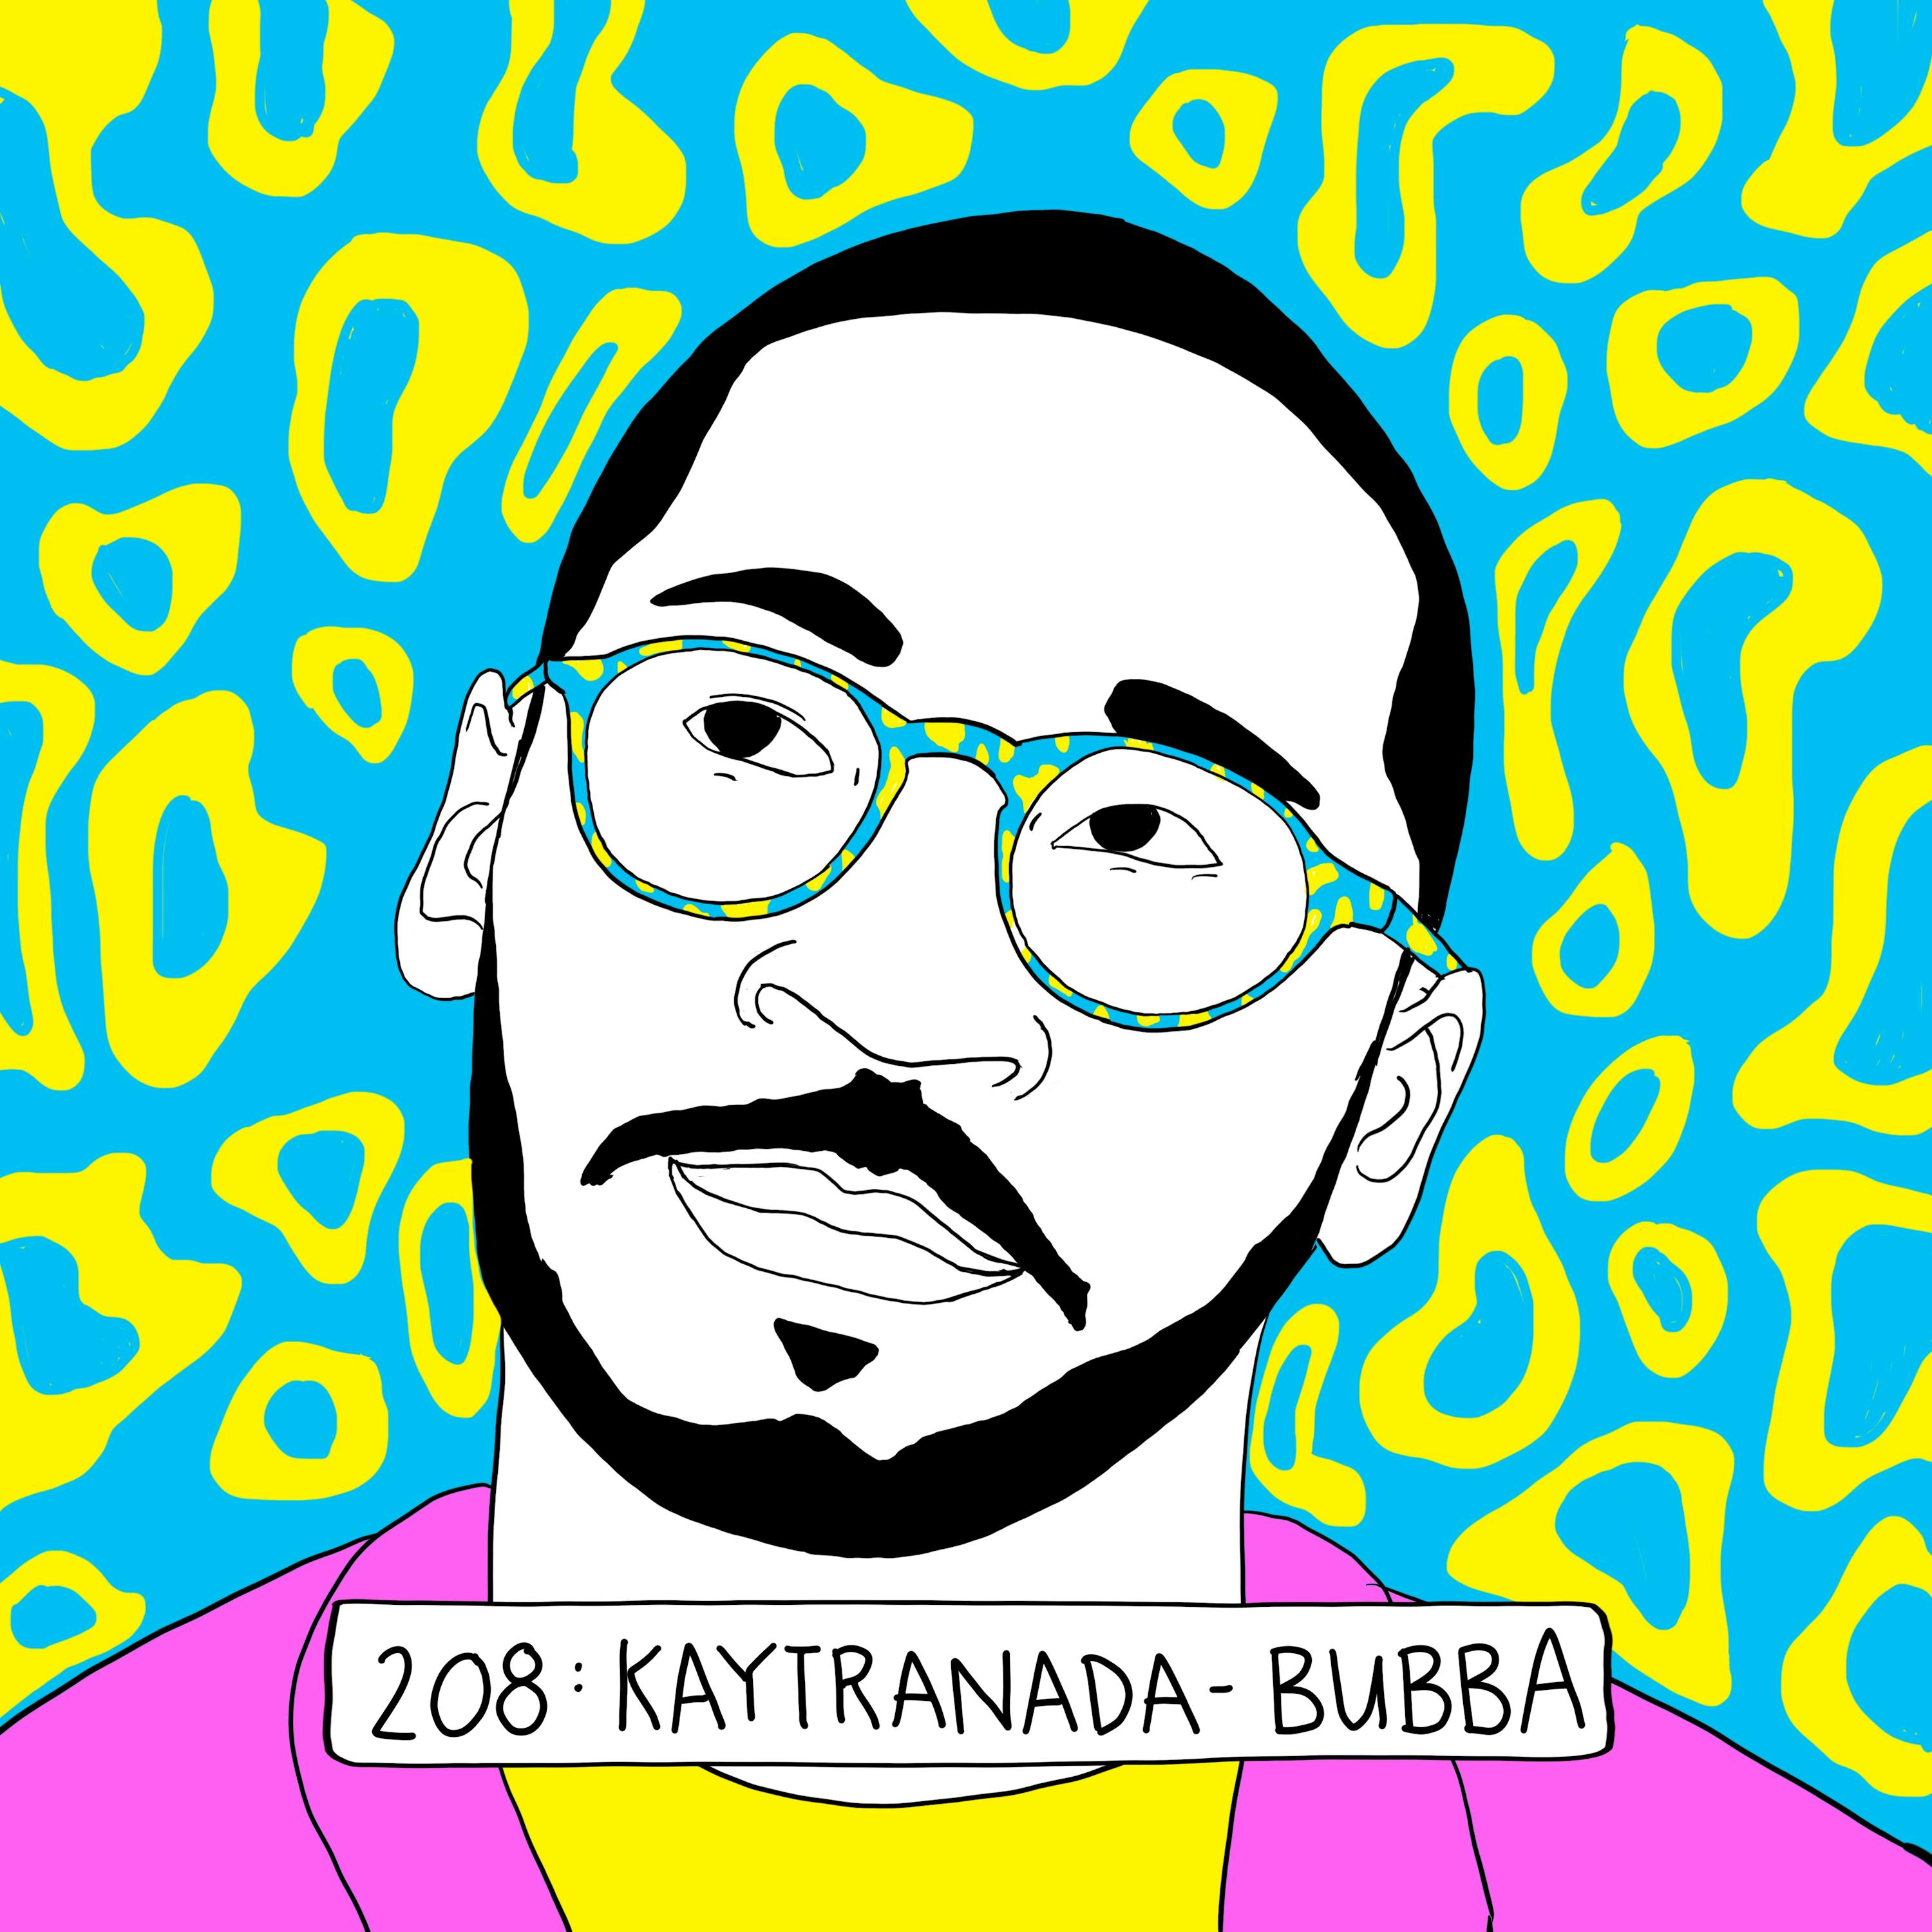 Kaytranada's journey from basement beat-making to the Grammys